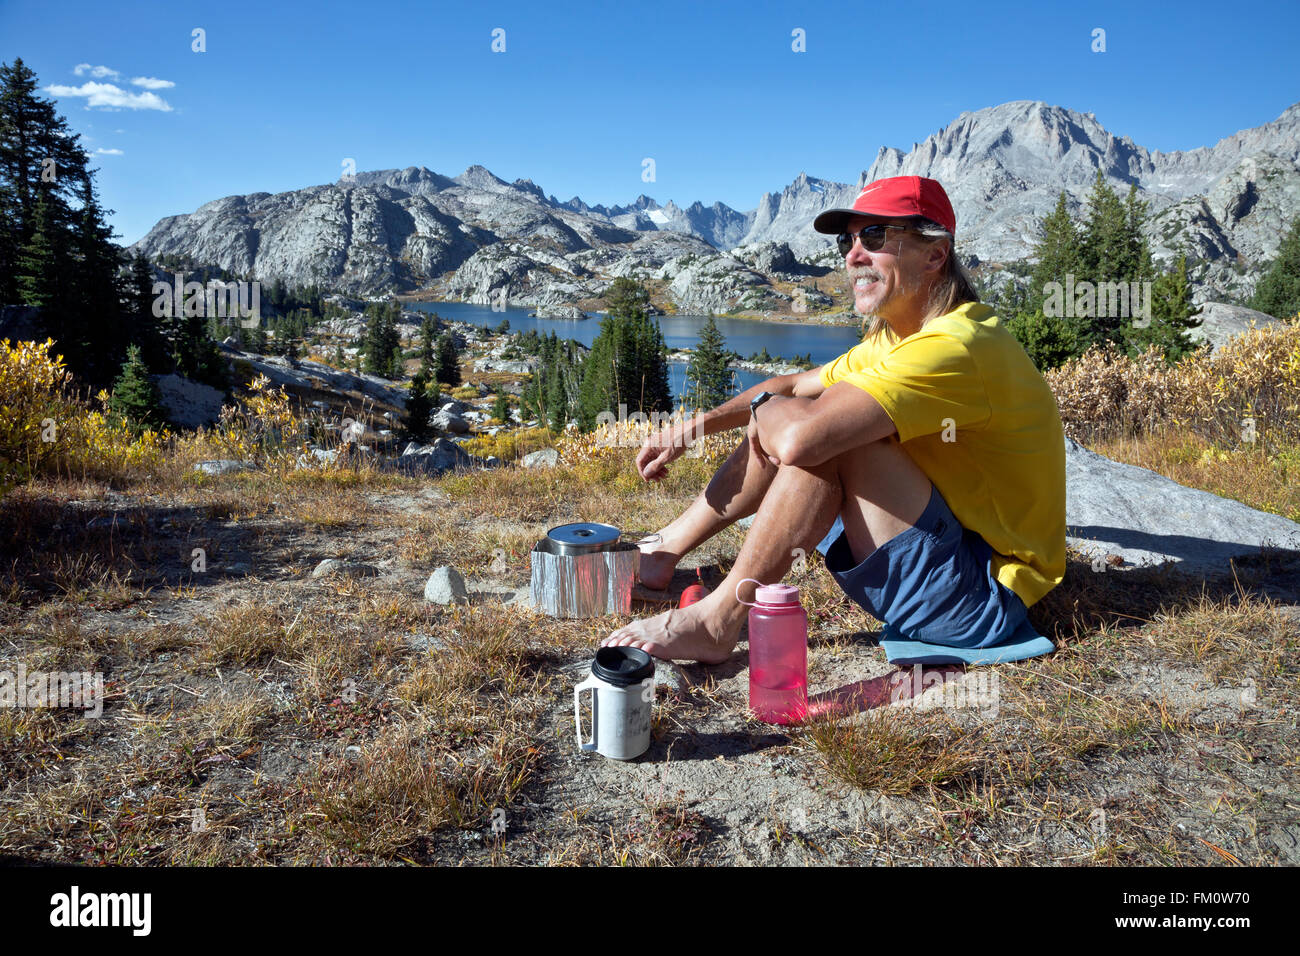 WYOMING - Cooking dinner while overlooking Island Lake and up into Titcomb Basin in Bridger Wilderness area of the Wind Rivers. Stock Photo